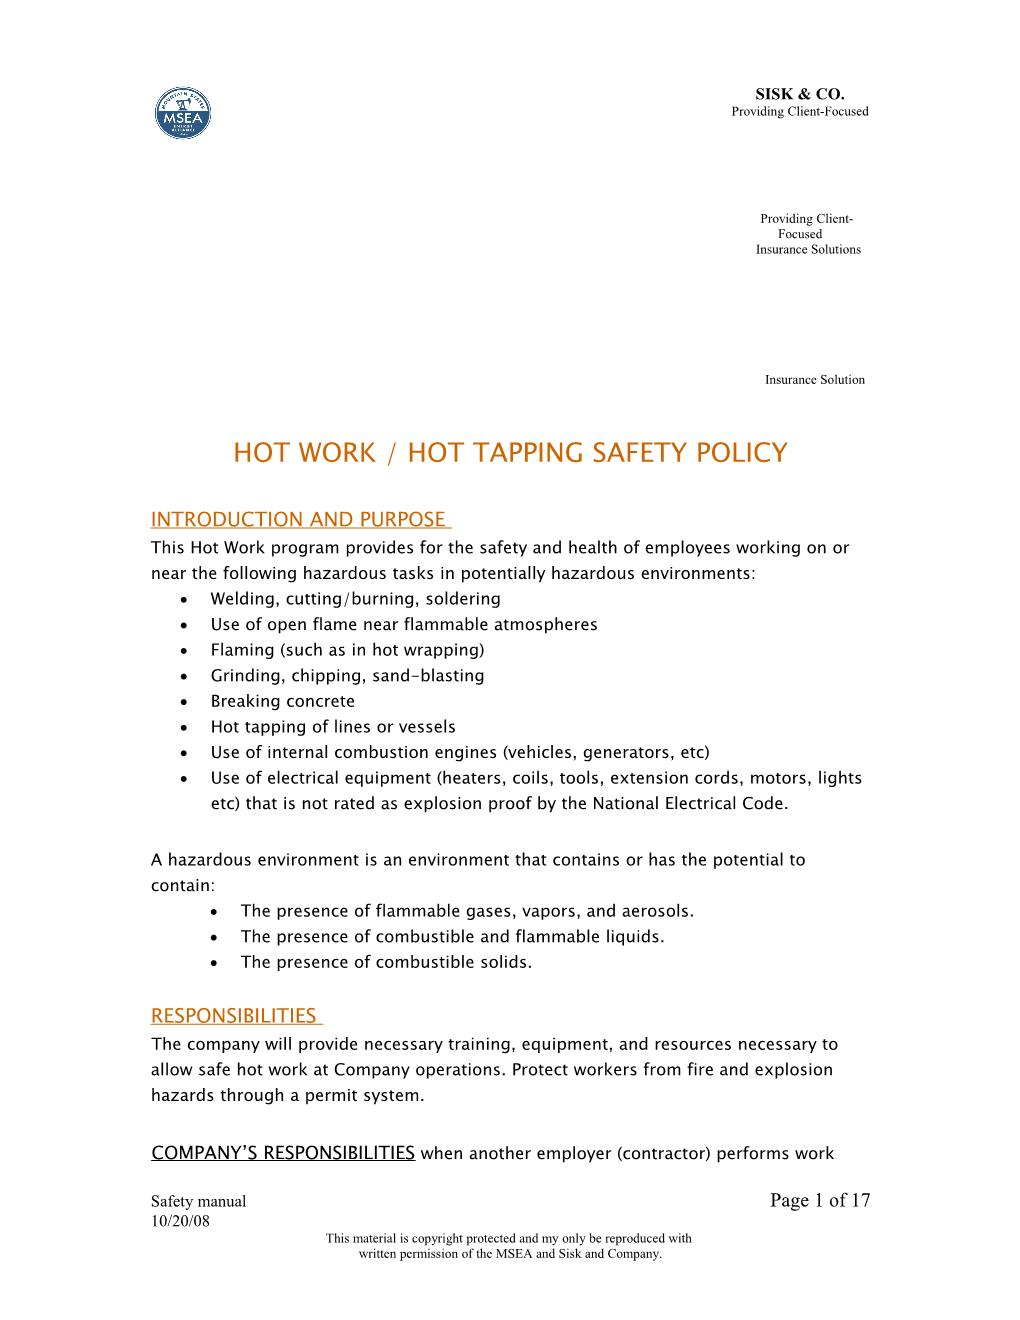 Hot Work / Hot Tapping Safety Policy